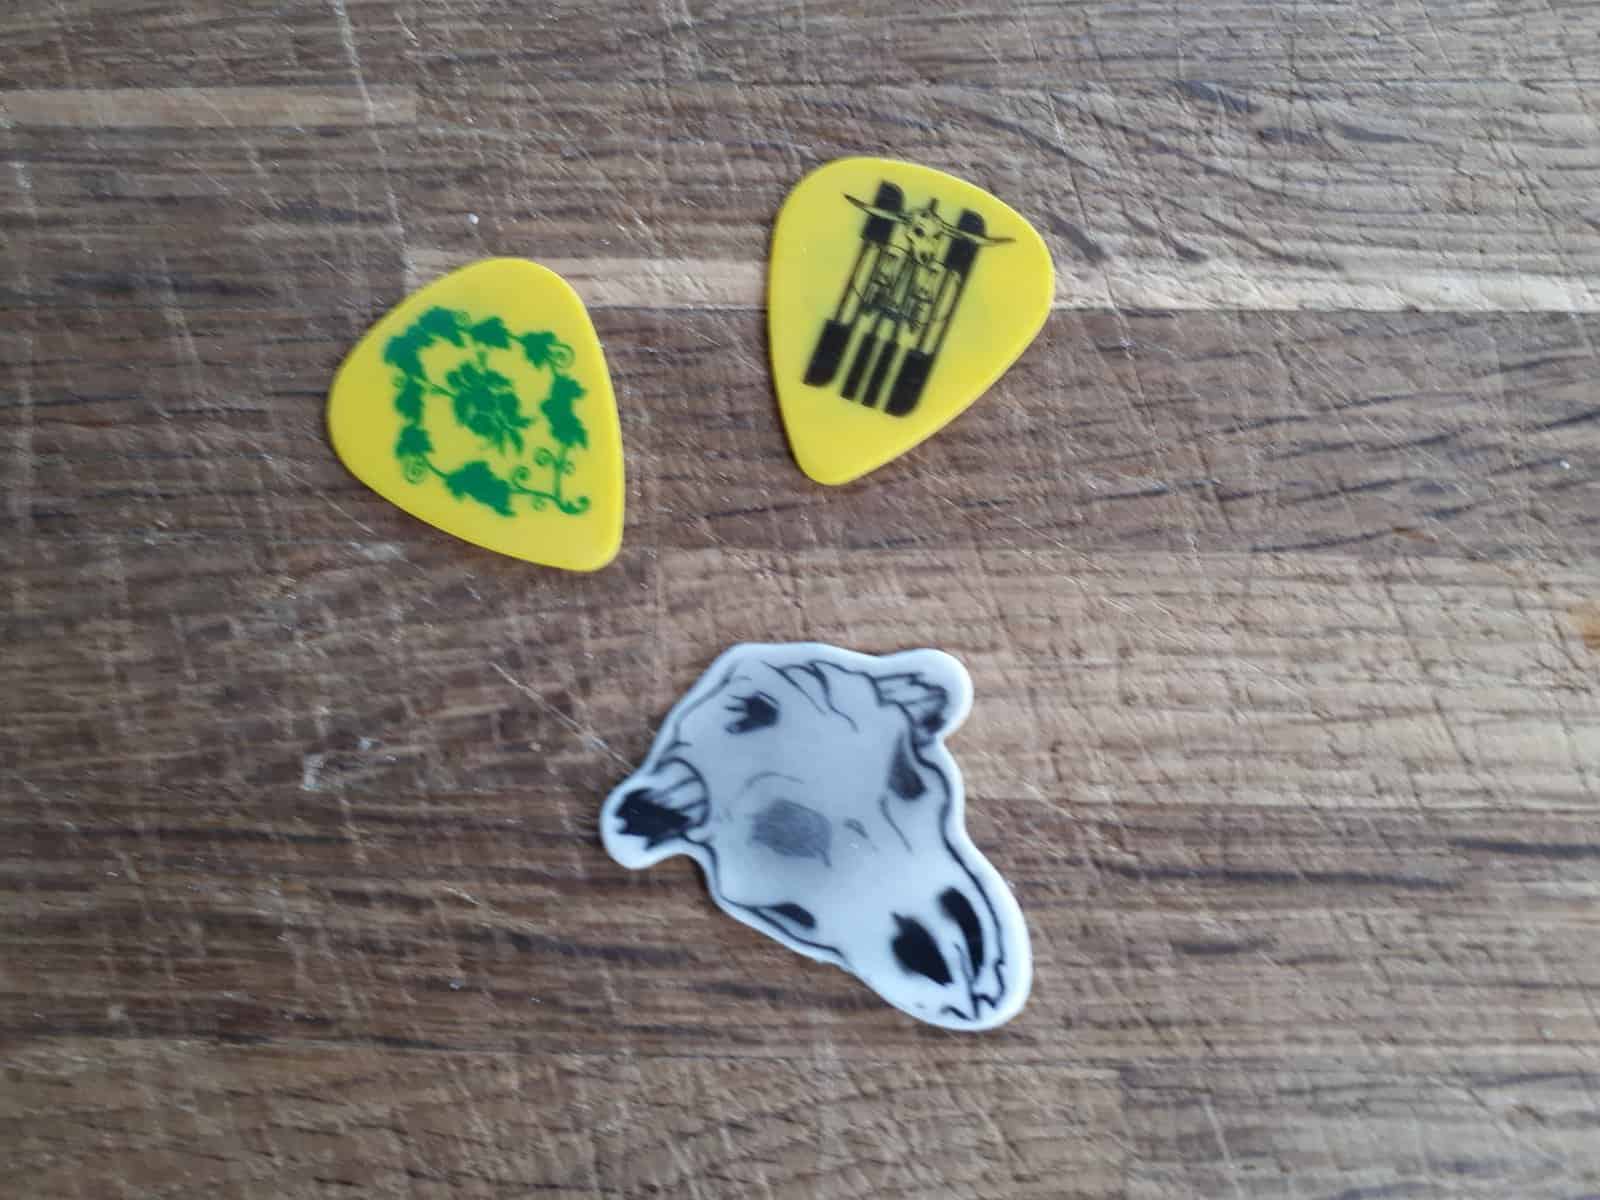 PLECTRUMS FROM RINGSTED KONGRESCENTER, MAY 23, 2019, FRONT